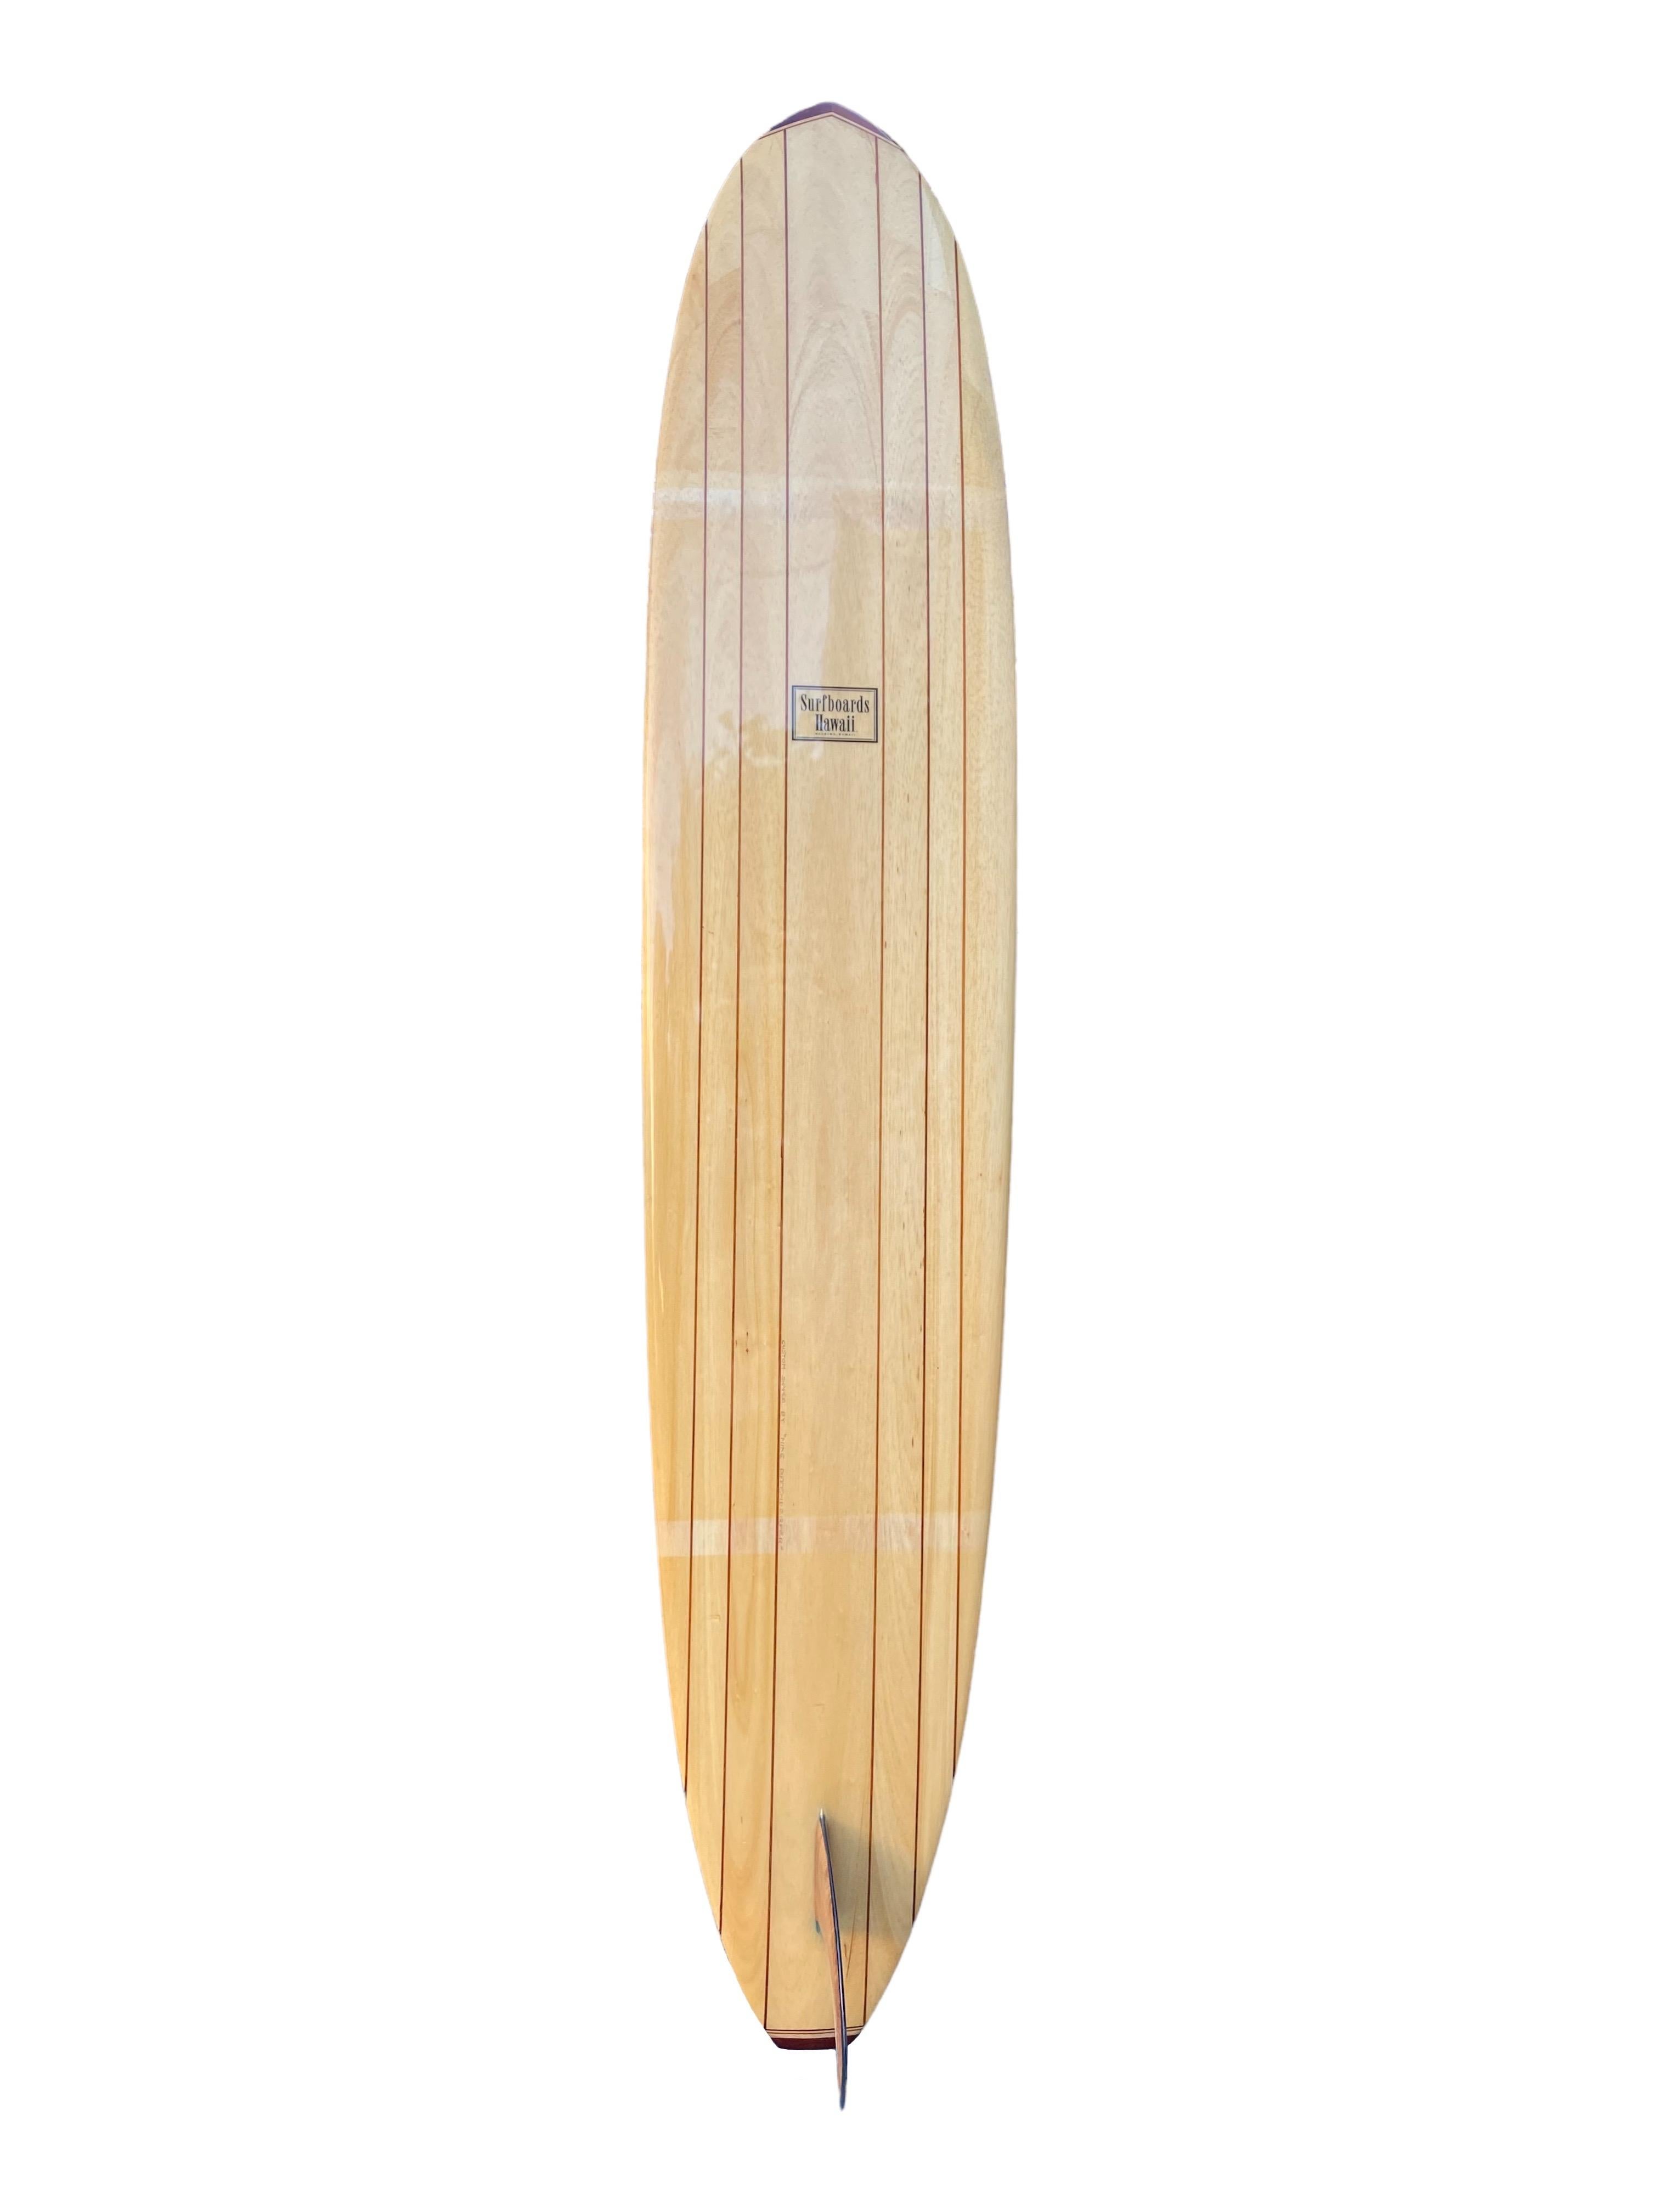 1995-96 Vintage Surfboards Hawaii custom balsa longboard made by the late Mike Diffenderfer (1937-2002). Features a classic longboard shape design with 6 stringers and gorgeous wooden noseblock and tailblock. Beautiful mango wood fin with blue halo